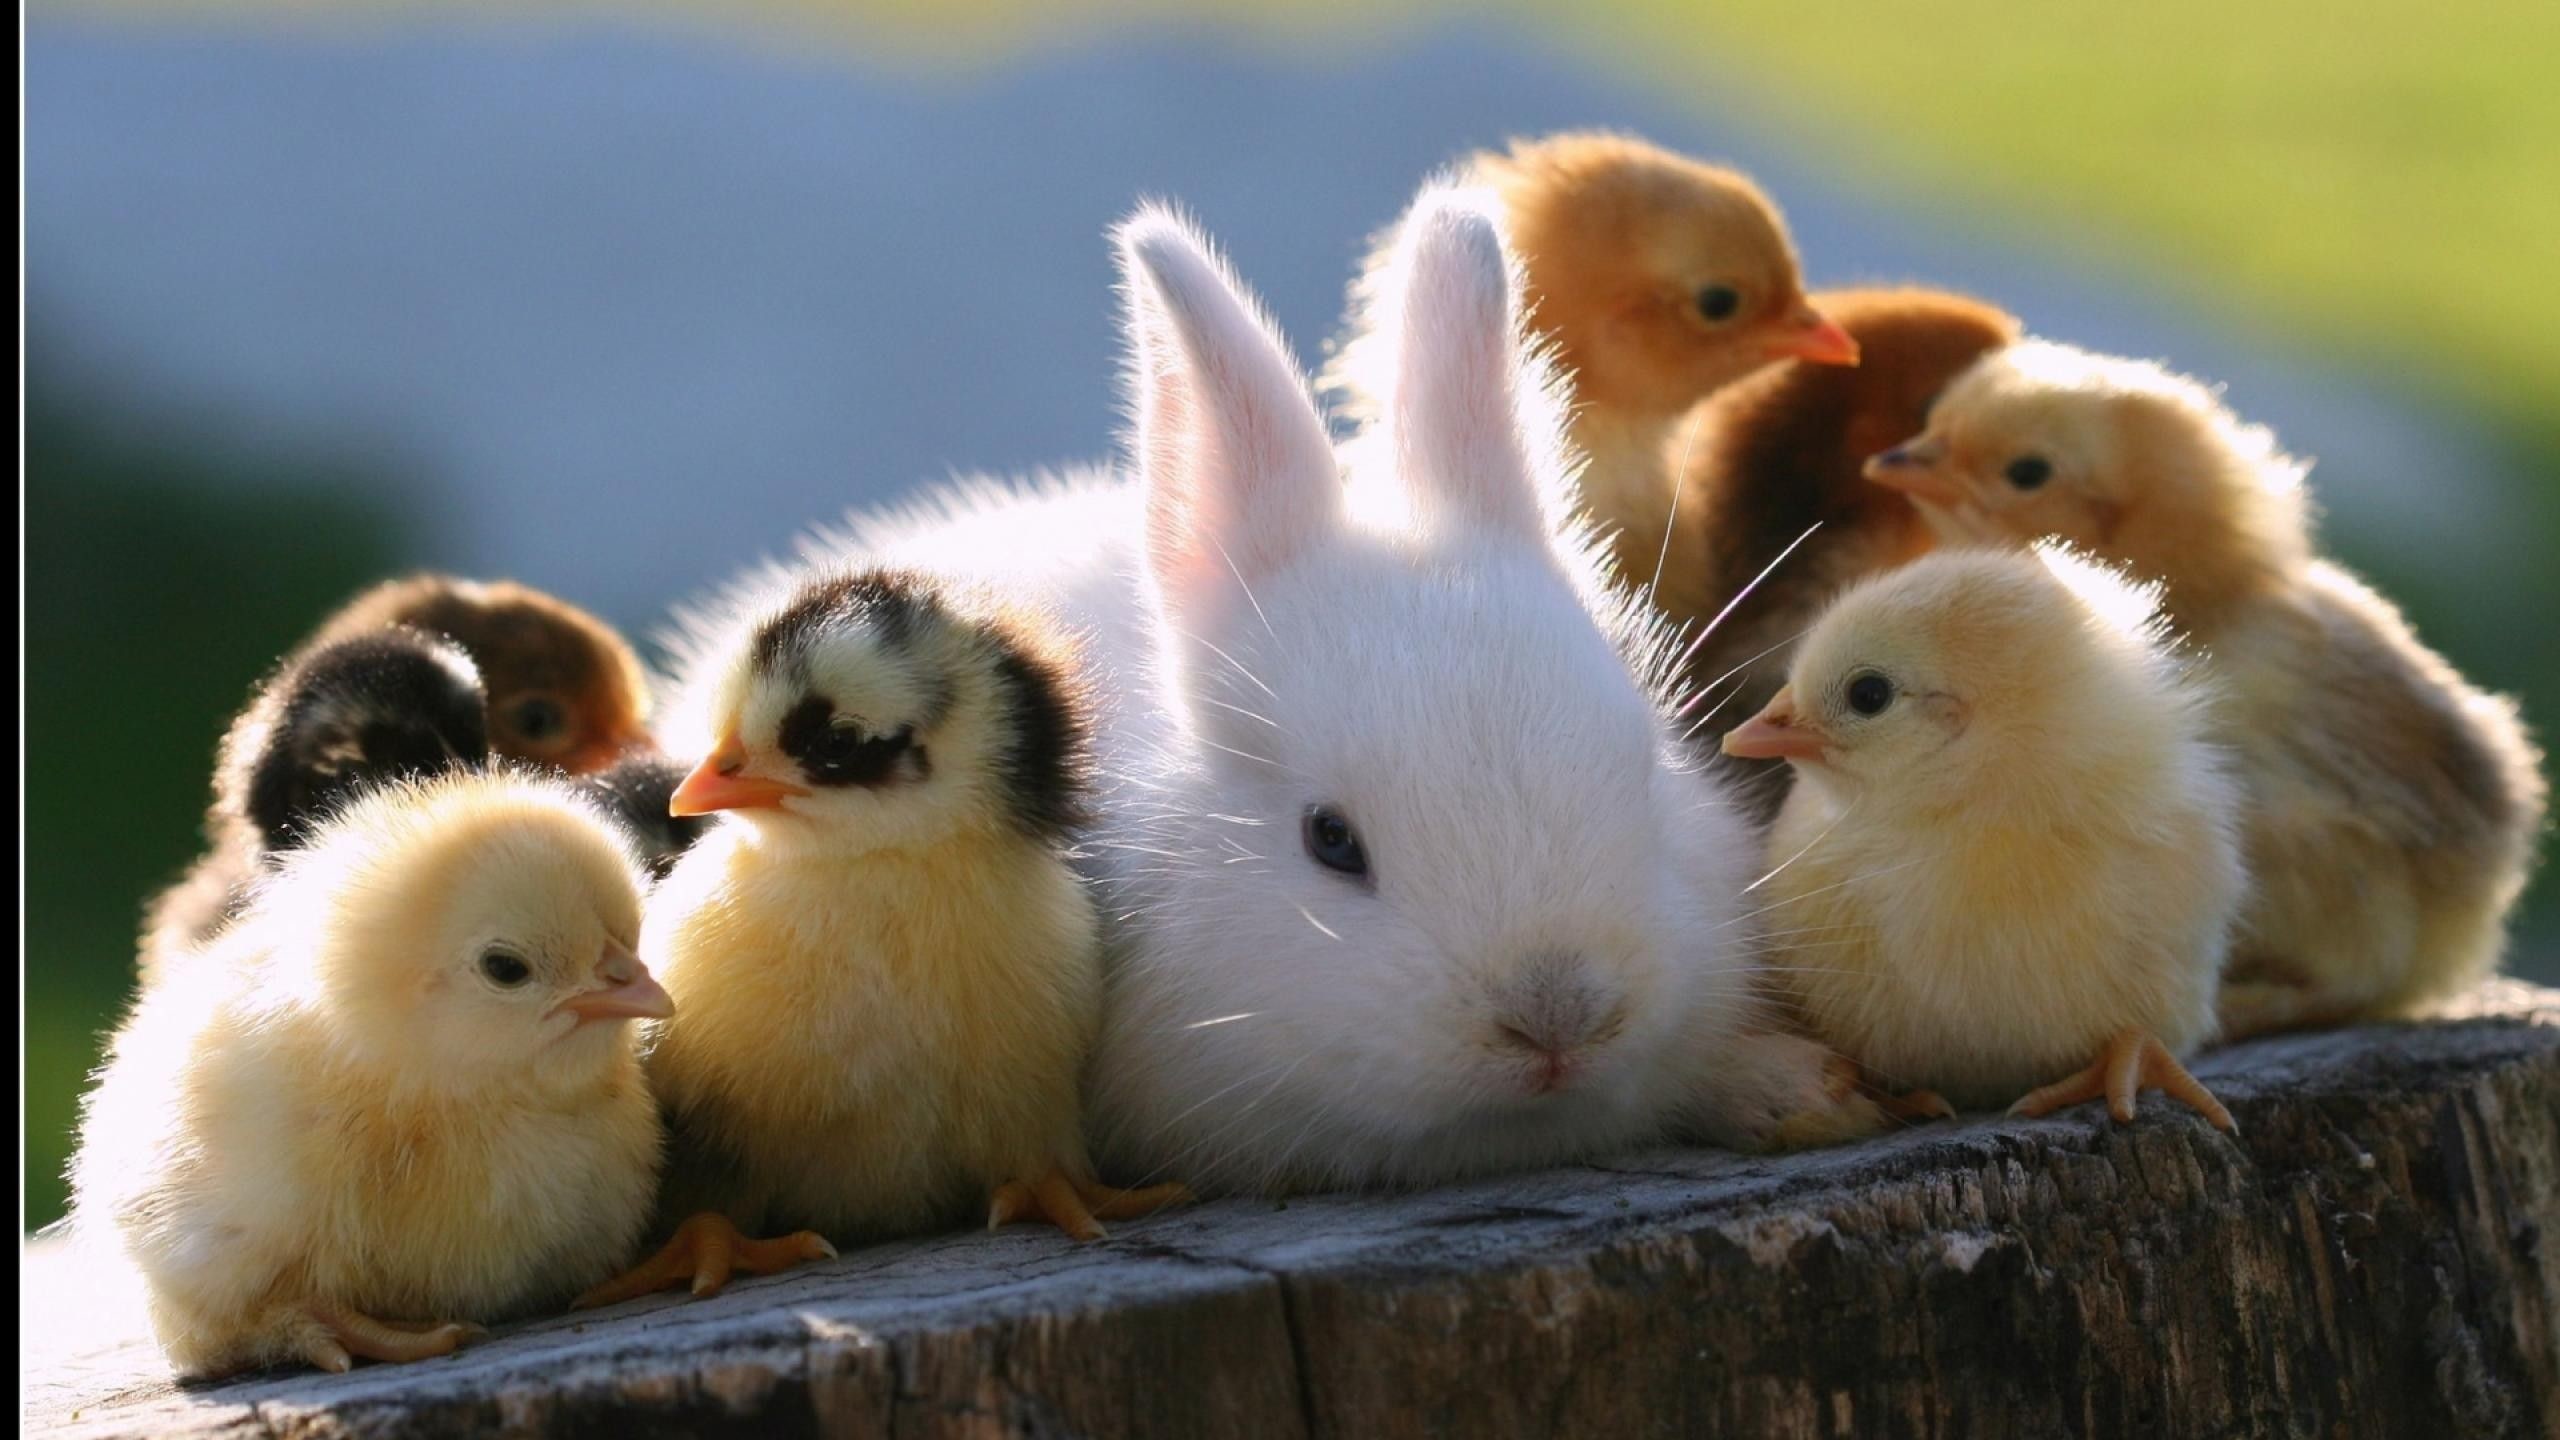 2560x1440 Baby Rabbits And Baby Chickens #3441 Wallpaper | AWS HD Wallpapers